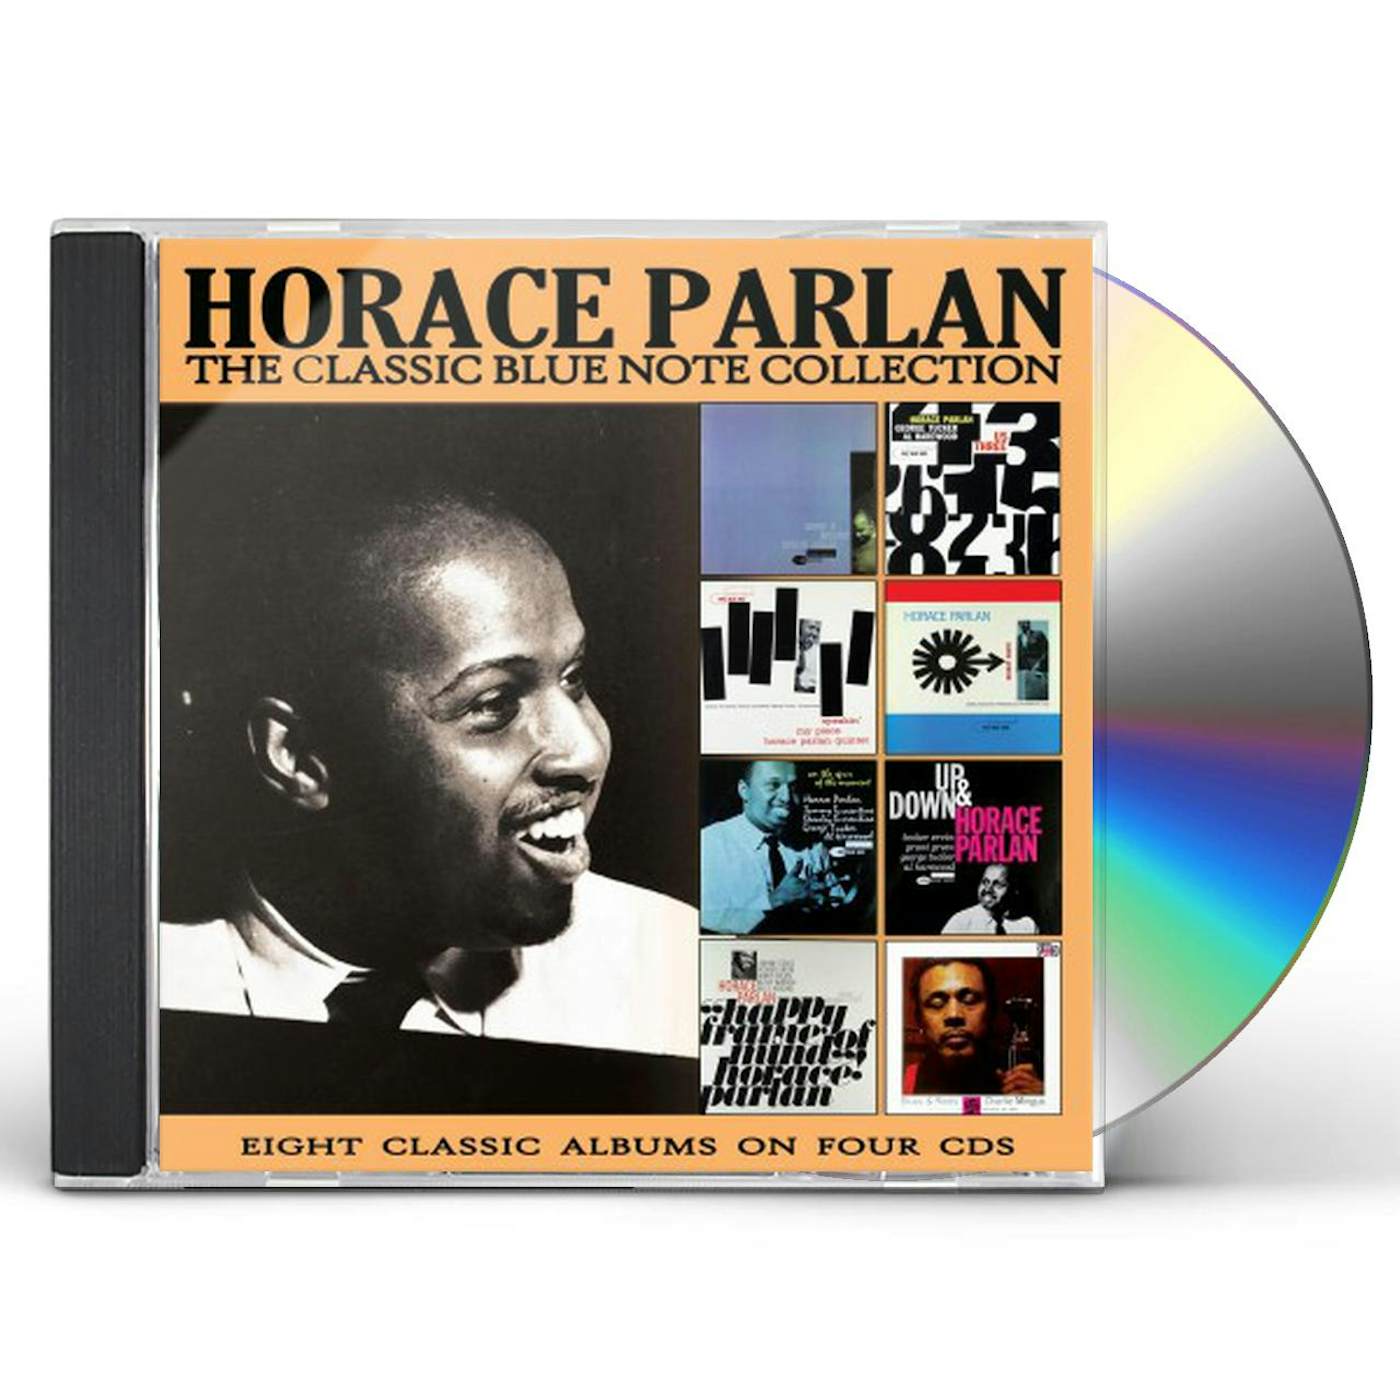 Horace Parlan CLASSIC BLUE NOTE COLLECTION CD